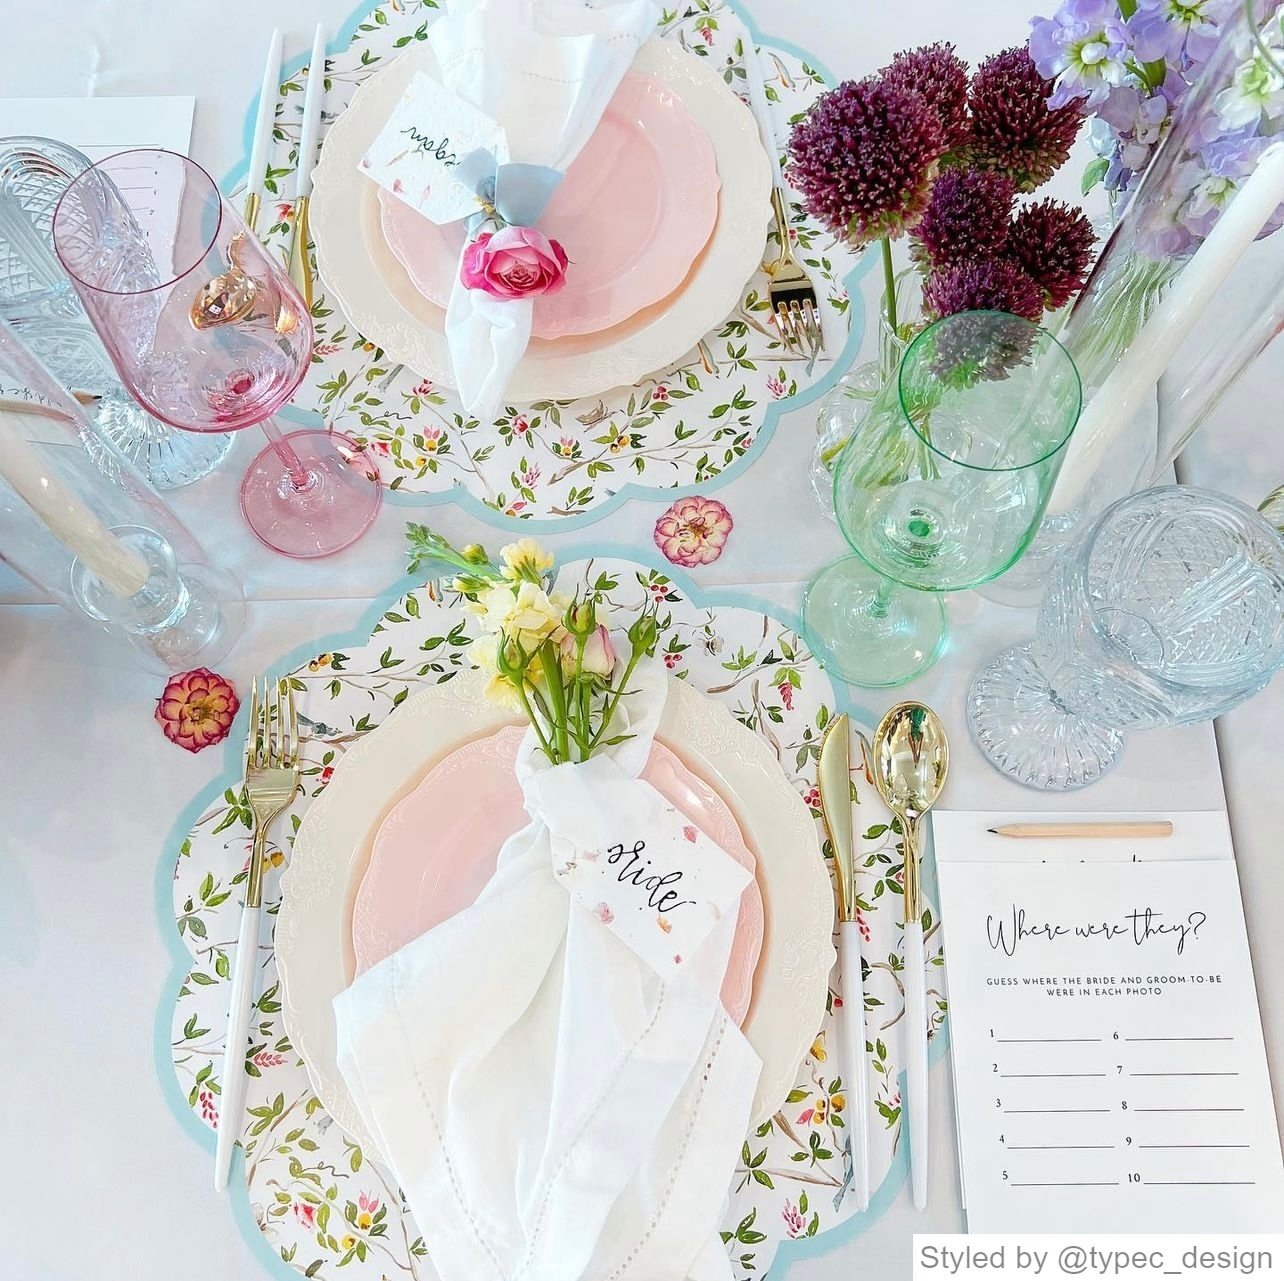 Table setting with chinoiserie round scalloped paper placemats layered with white and pink plates and other pink, blue and green table decor